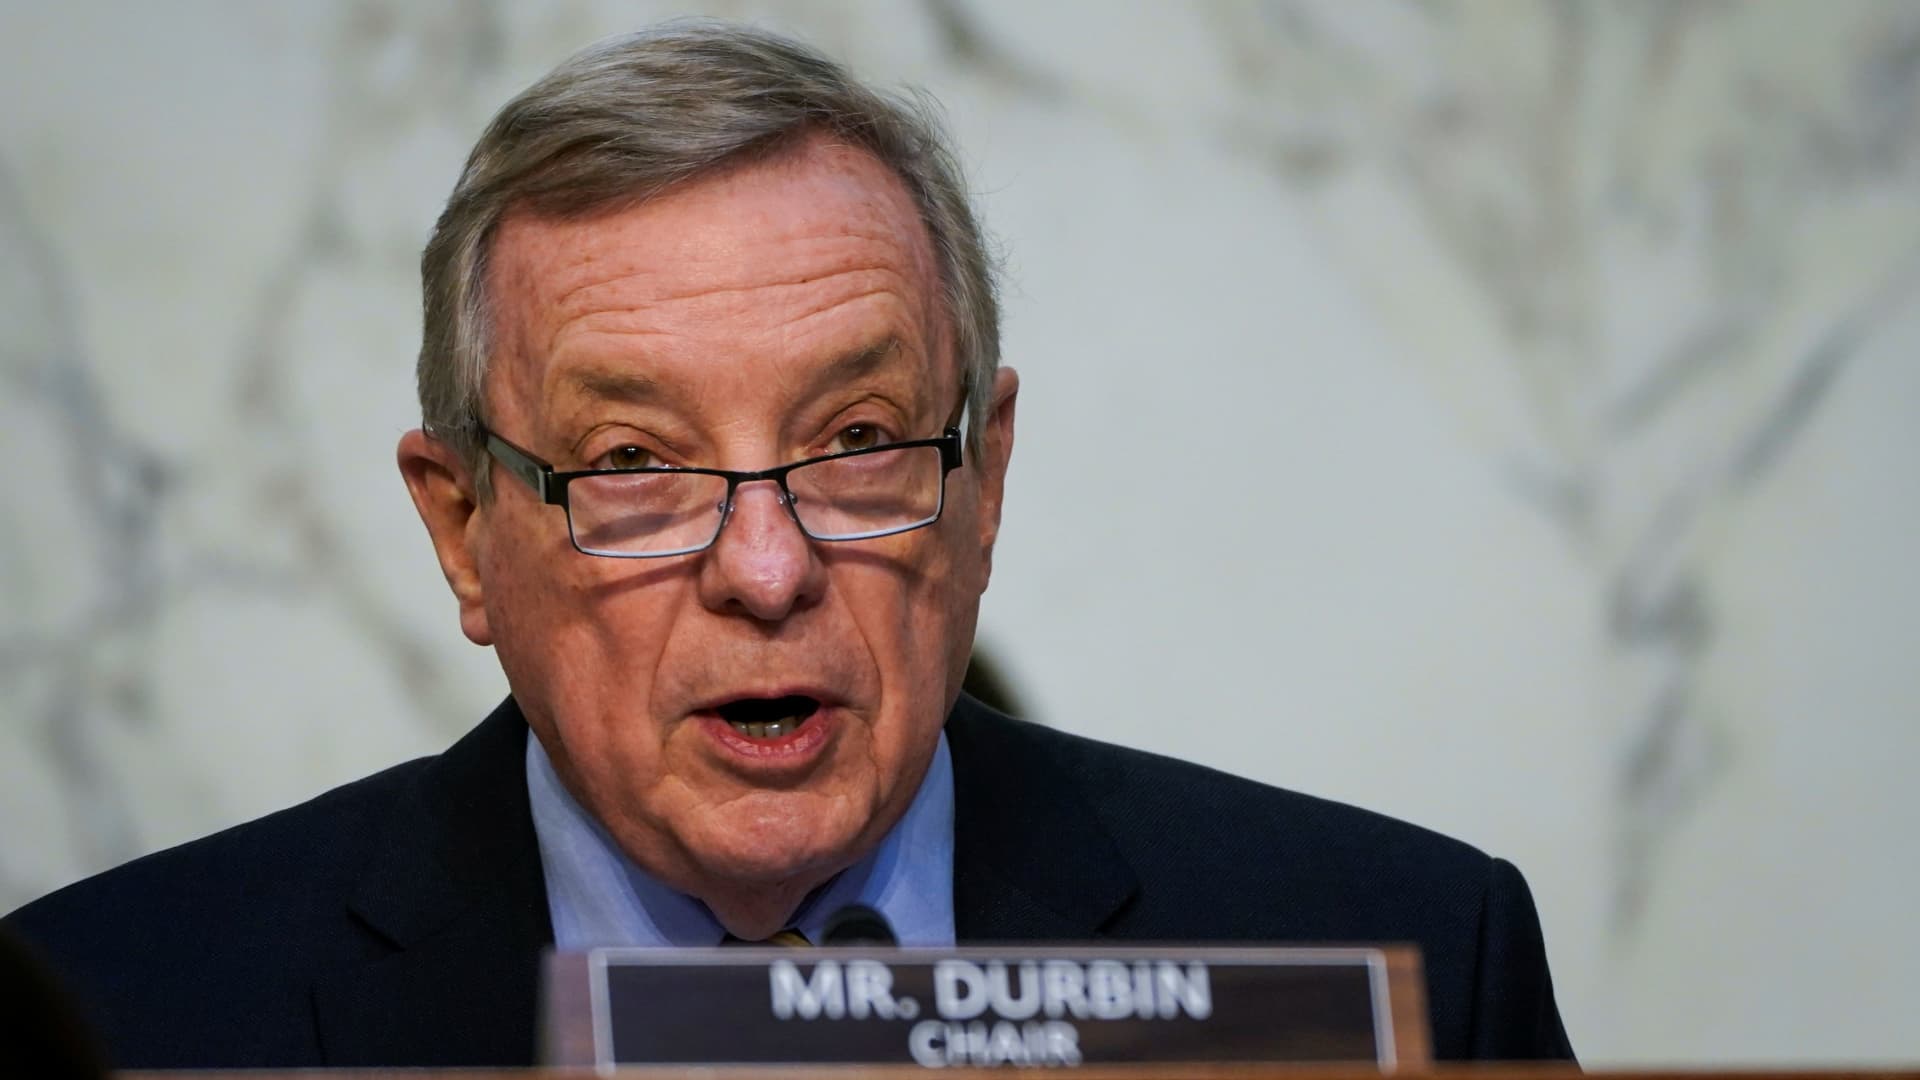 Senate Judiciary Committee chairman Sen. Dick Durbin (D-IL) speaks during his opening statement during Attorney General nominee Merrick Garland's confirmation hearing before the Senate Judiciary Committee, Washington, DC, February 22, 2021.